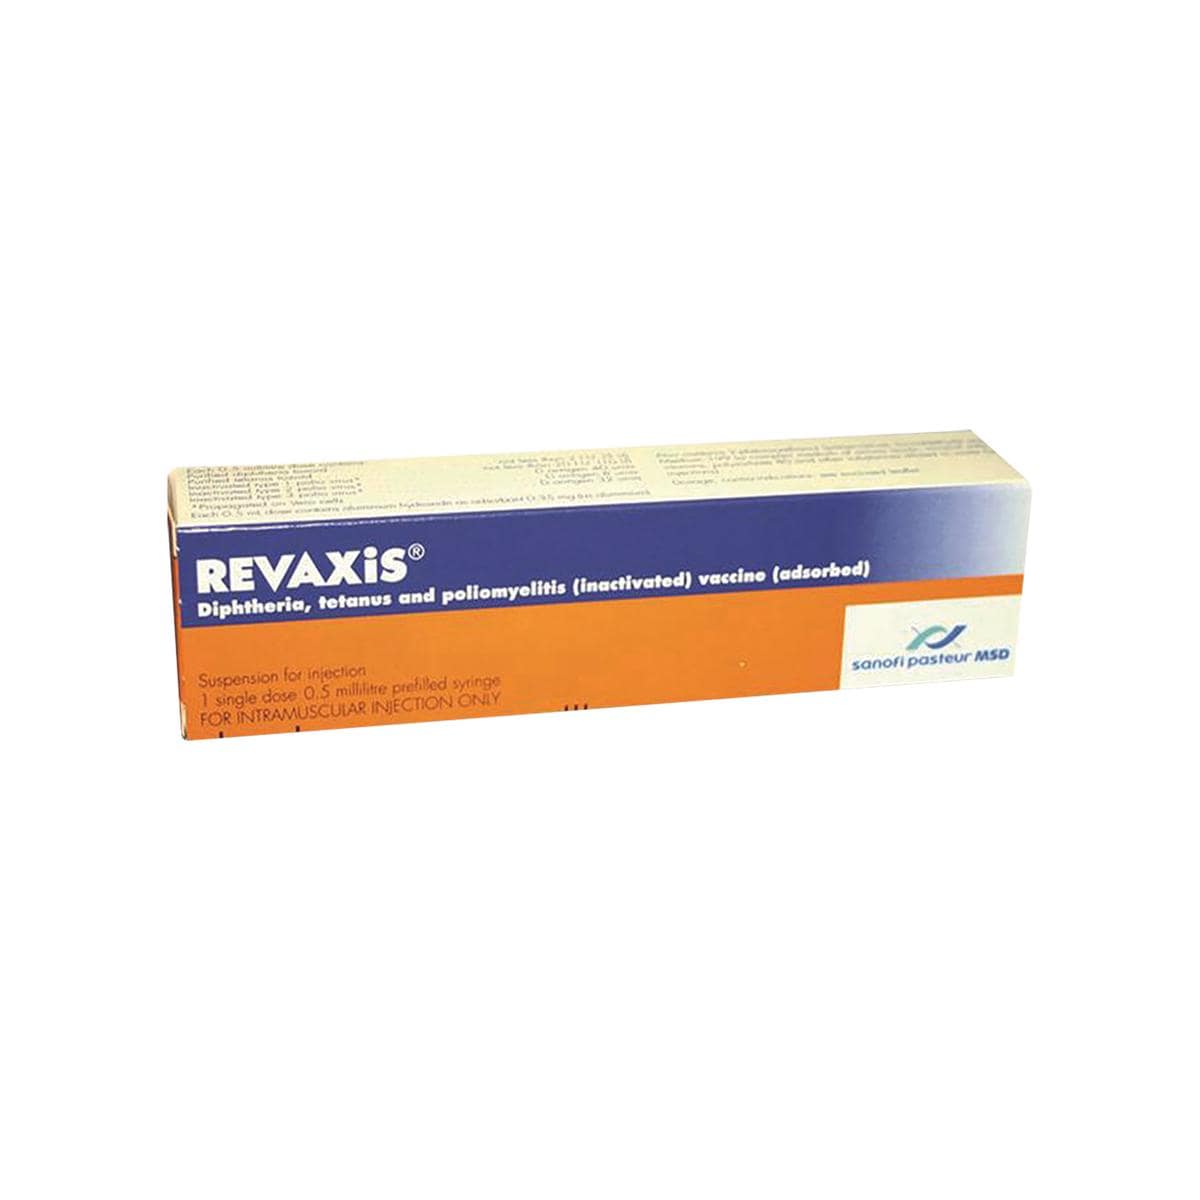 REVAXIS 3-in-1 Vaccine Suspension for Injection PFS 0.5ml